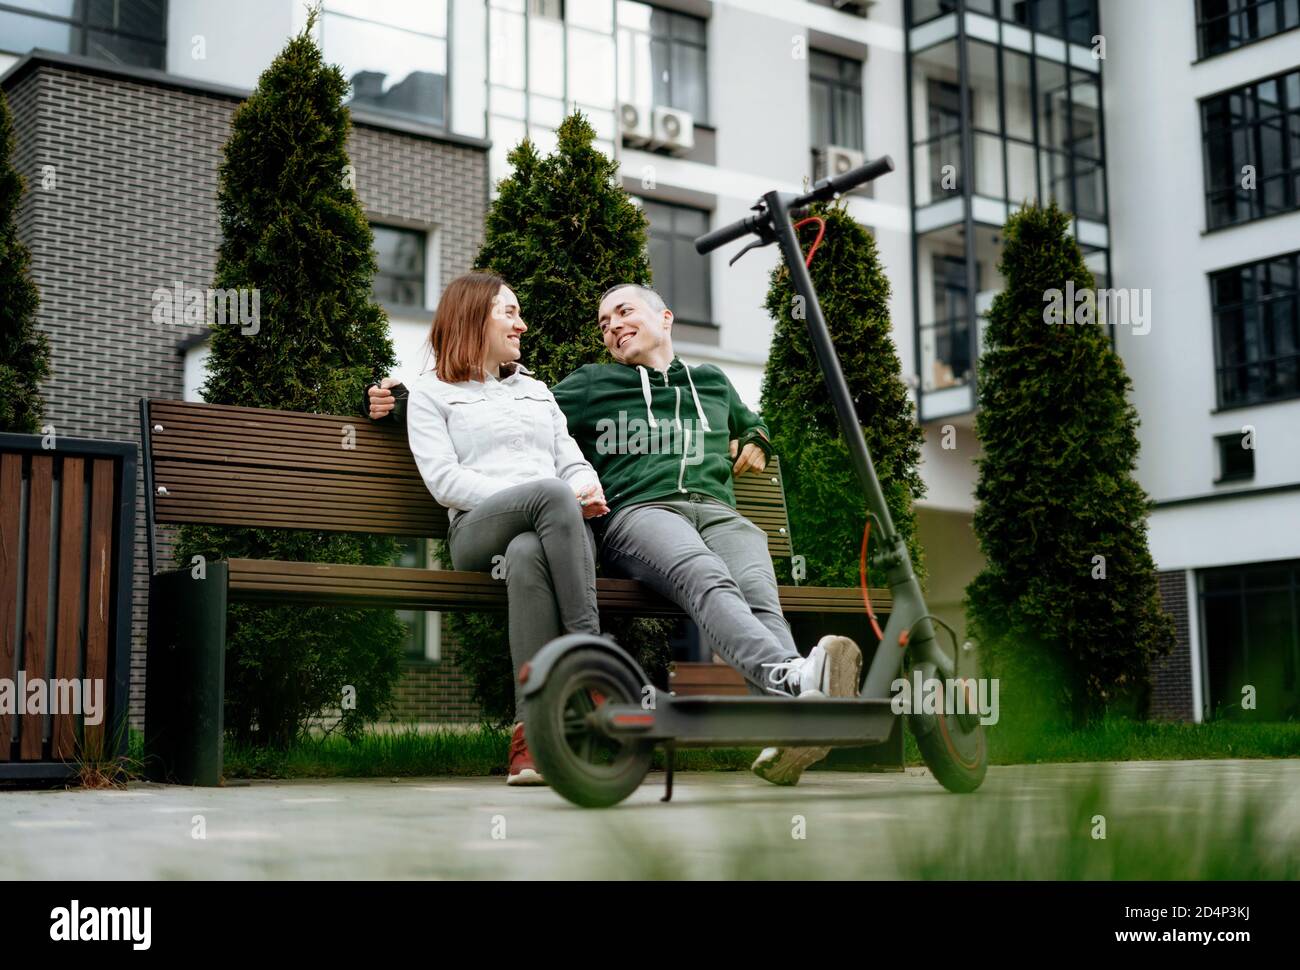 Couple sit next to electric kick scooter in street and laughing. Stock Photo